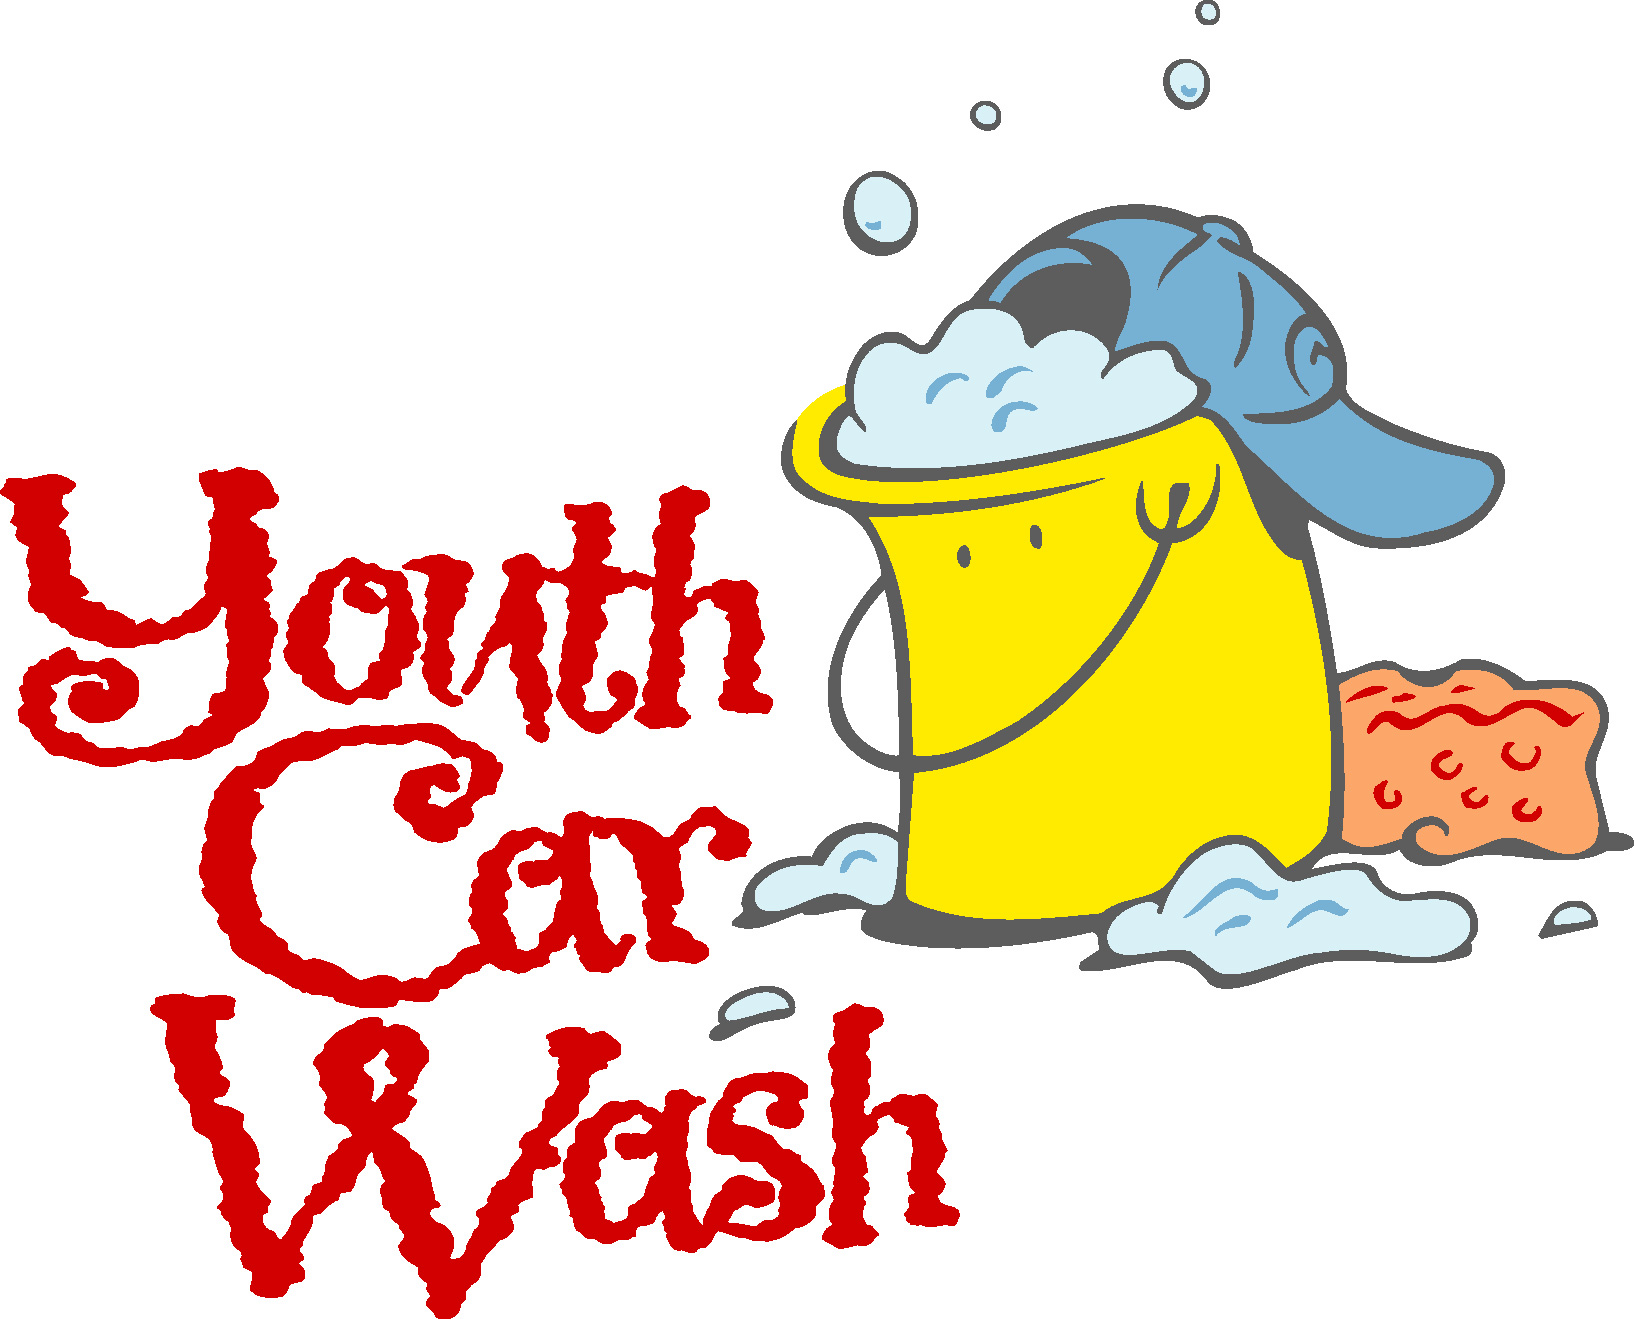 free clipart images car wash - photo #24